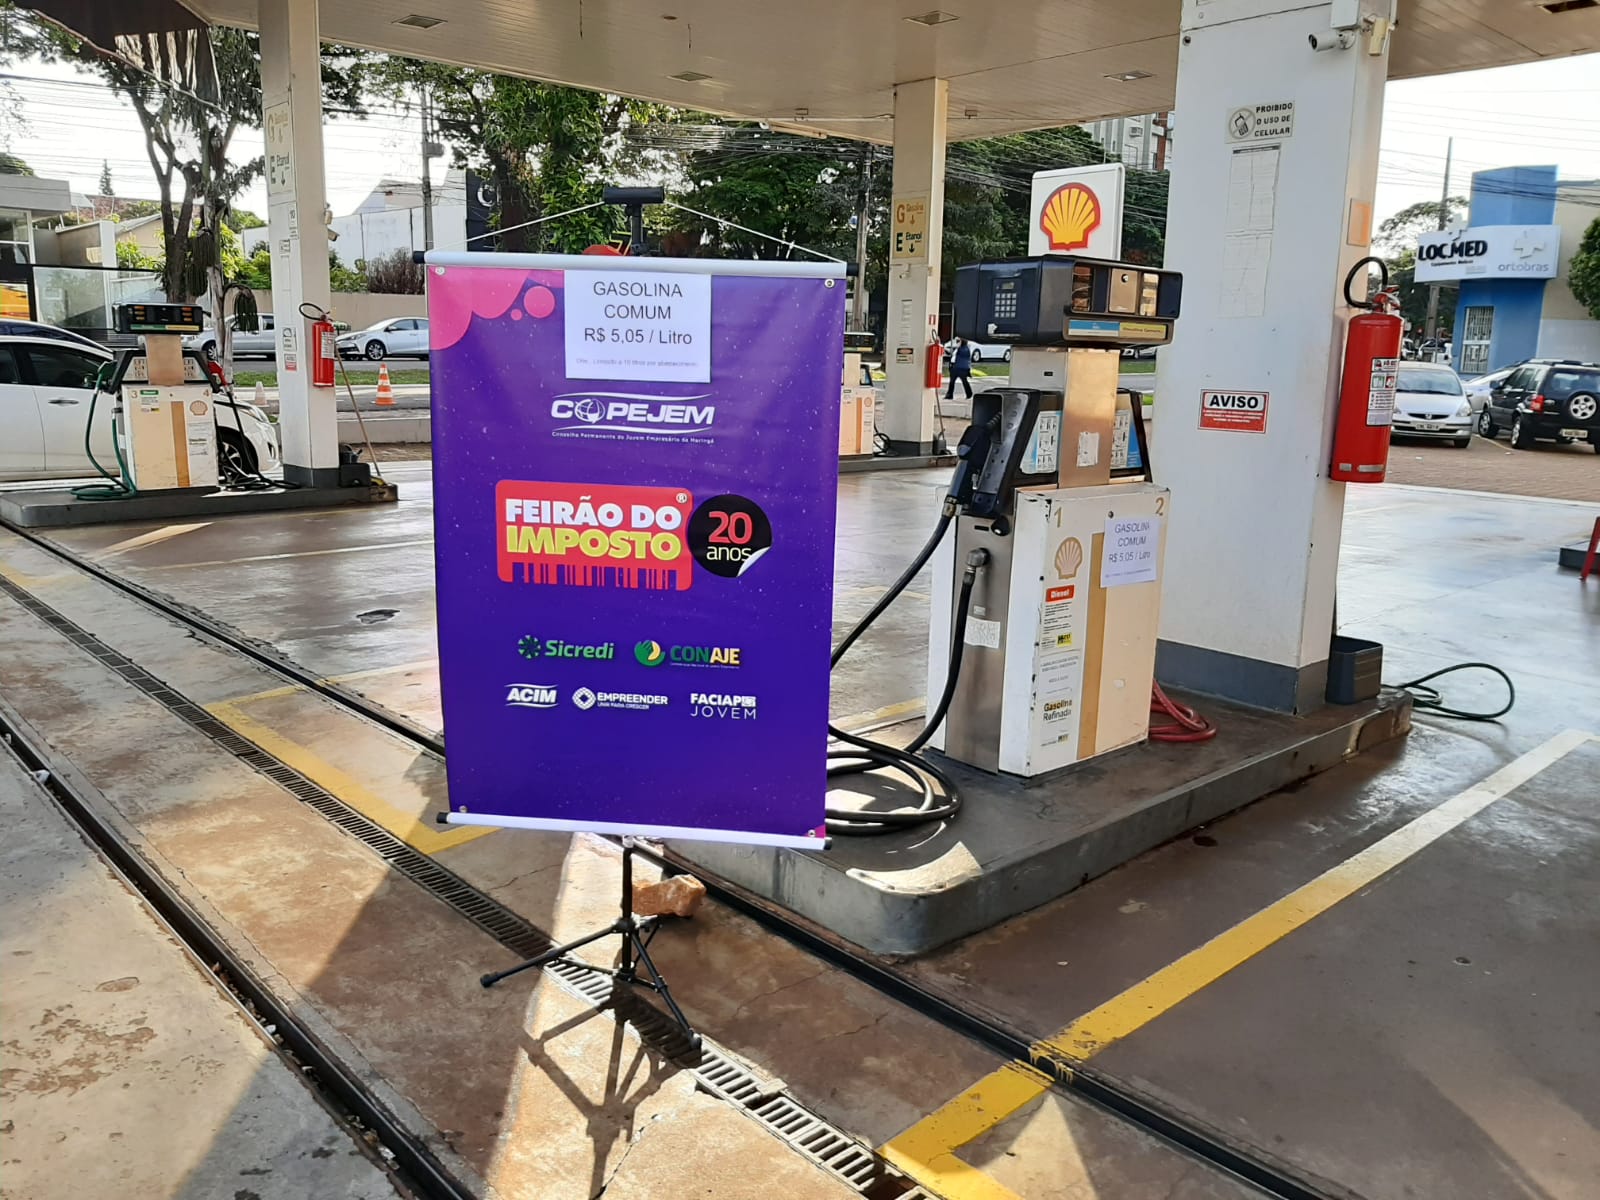 Maringaenses are lined up to fill tax-free gasoline